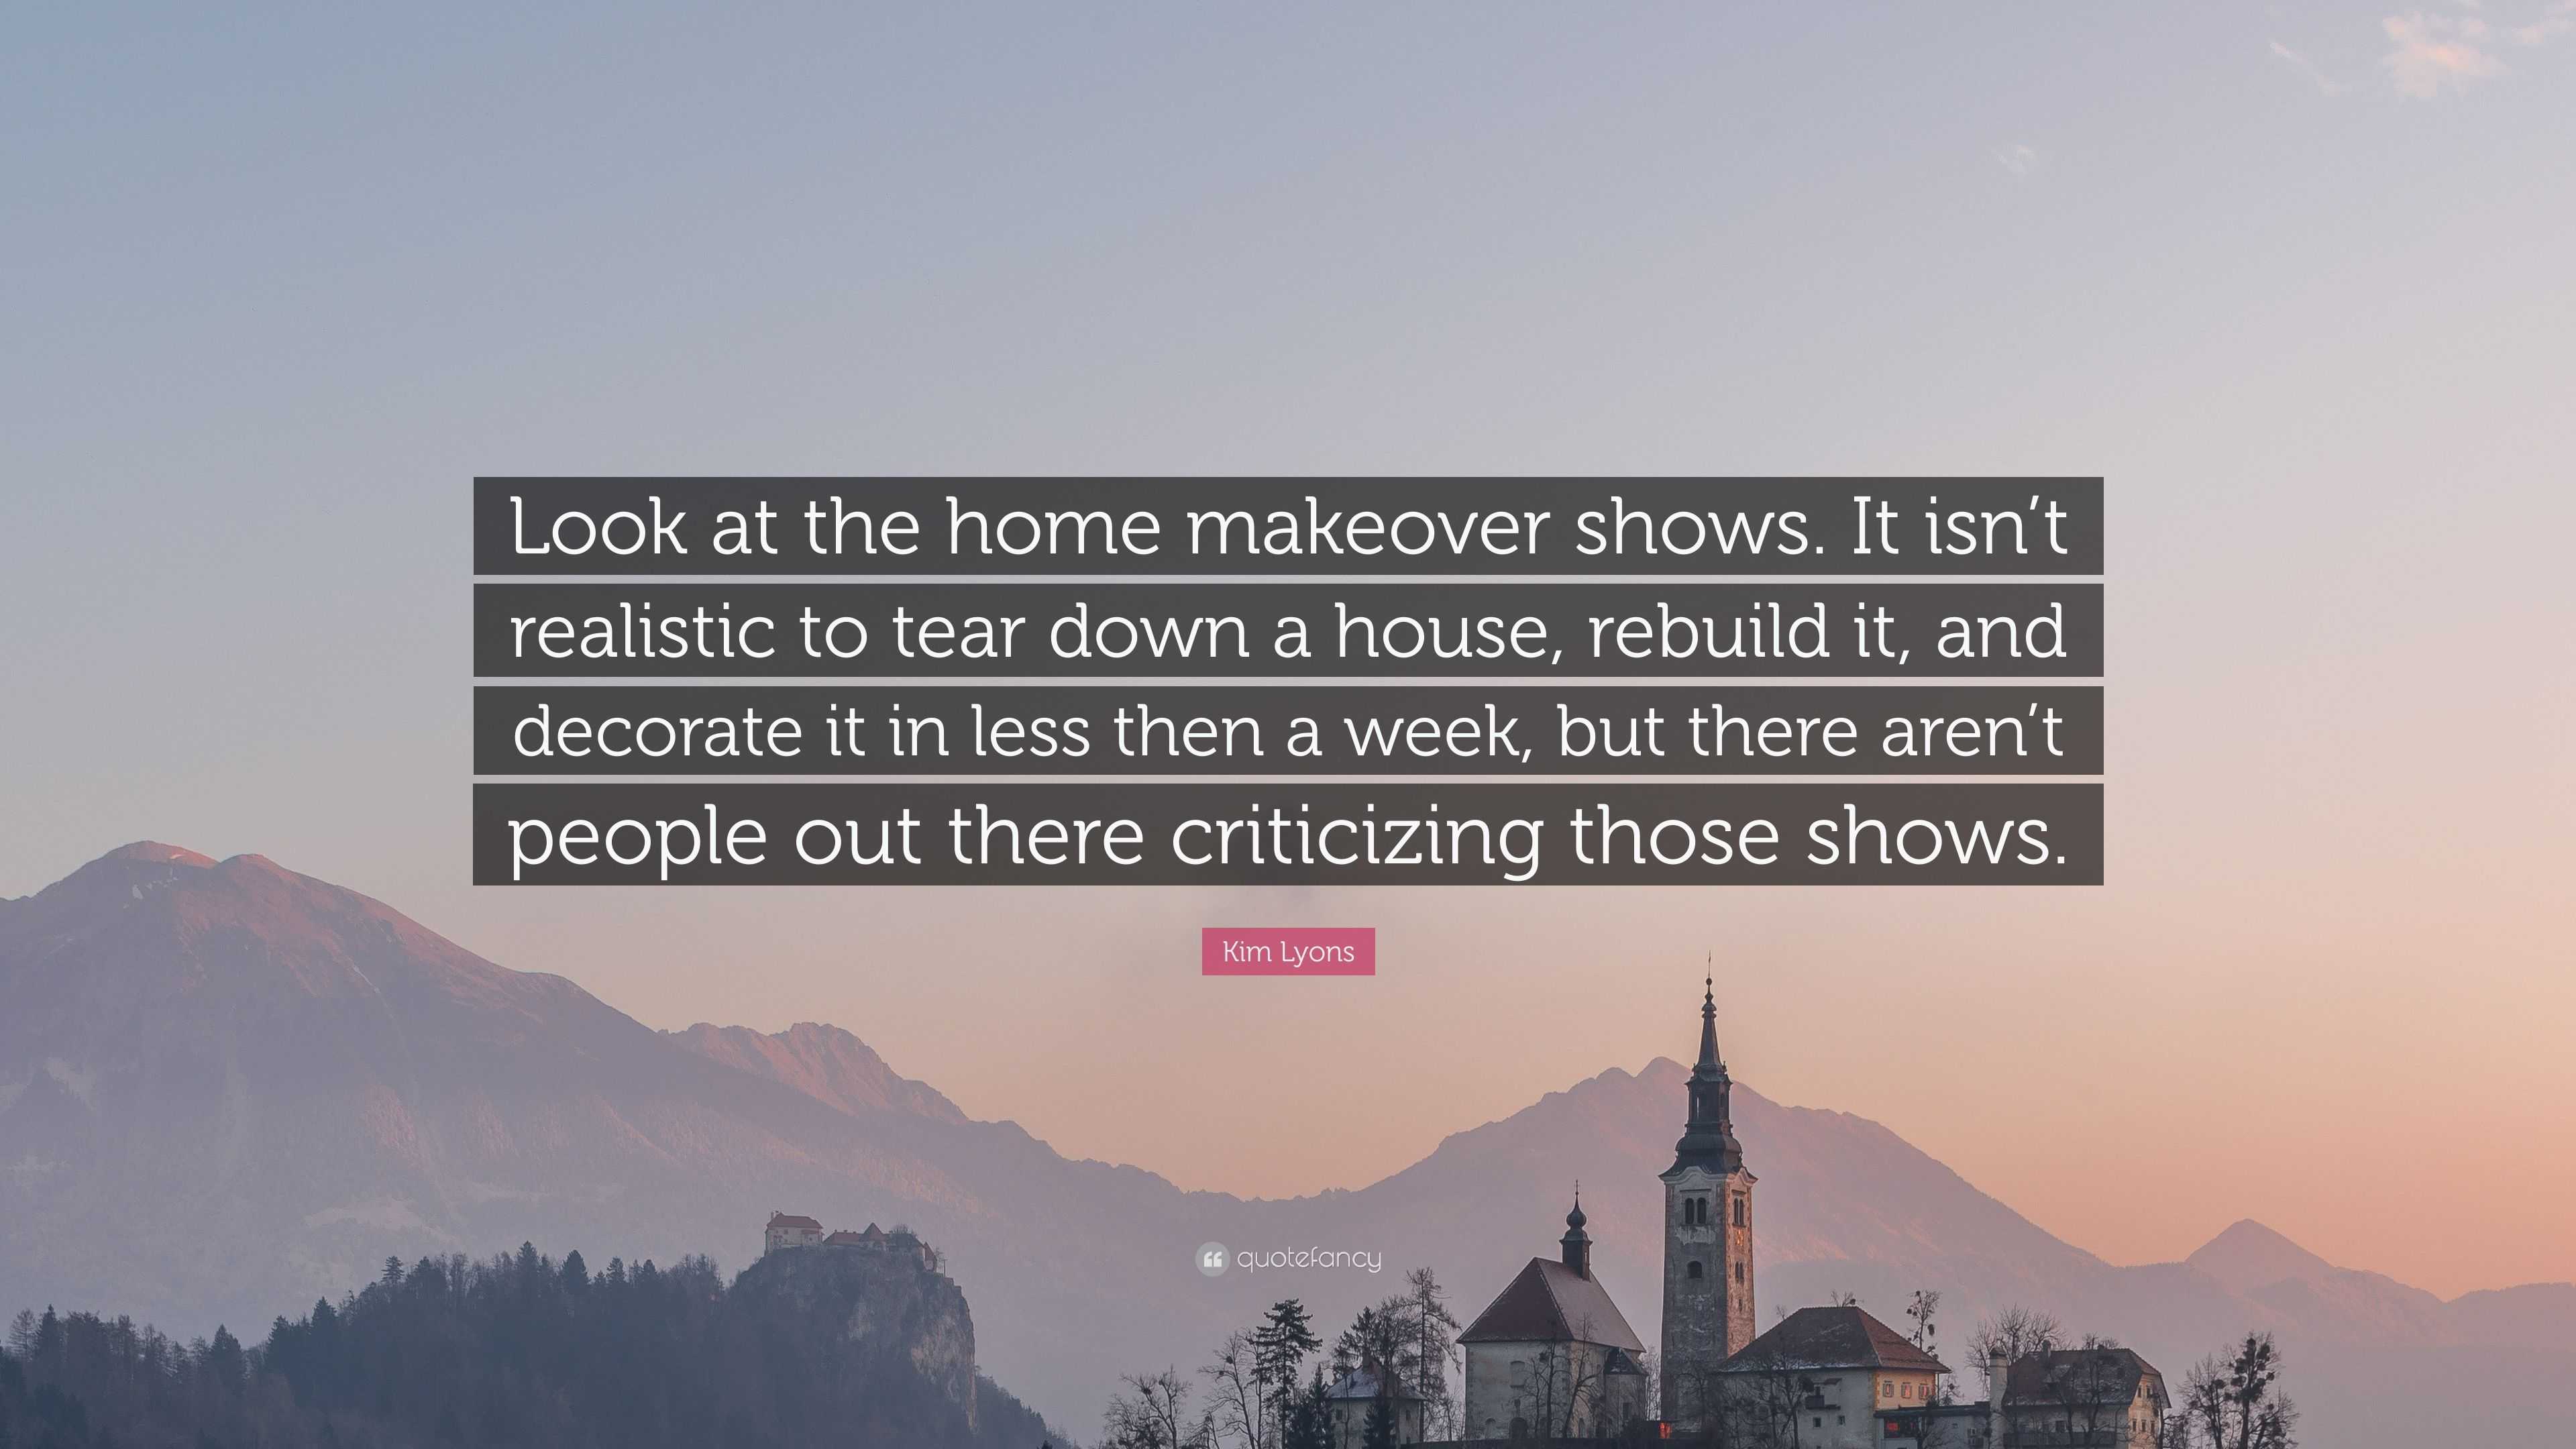 Kim Lyons Quote: "Look at the home makeover shows. It isn't realistic to tear down a house ...